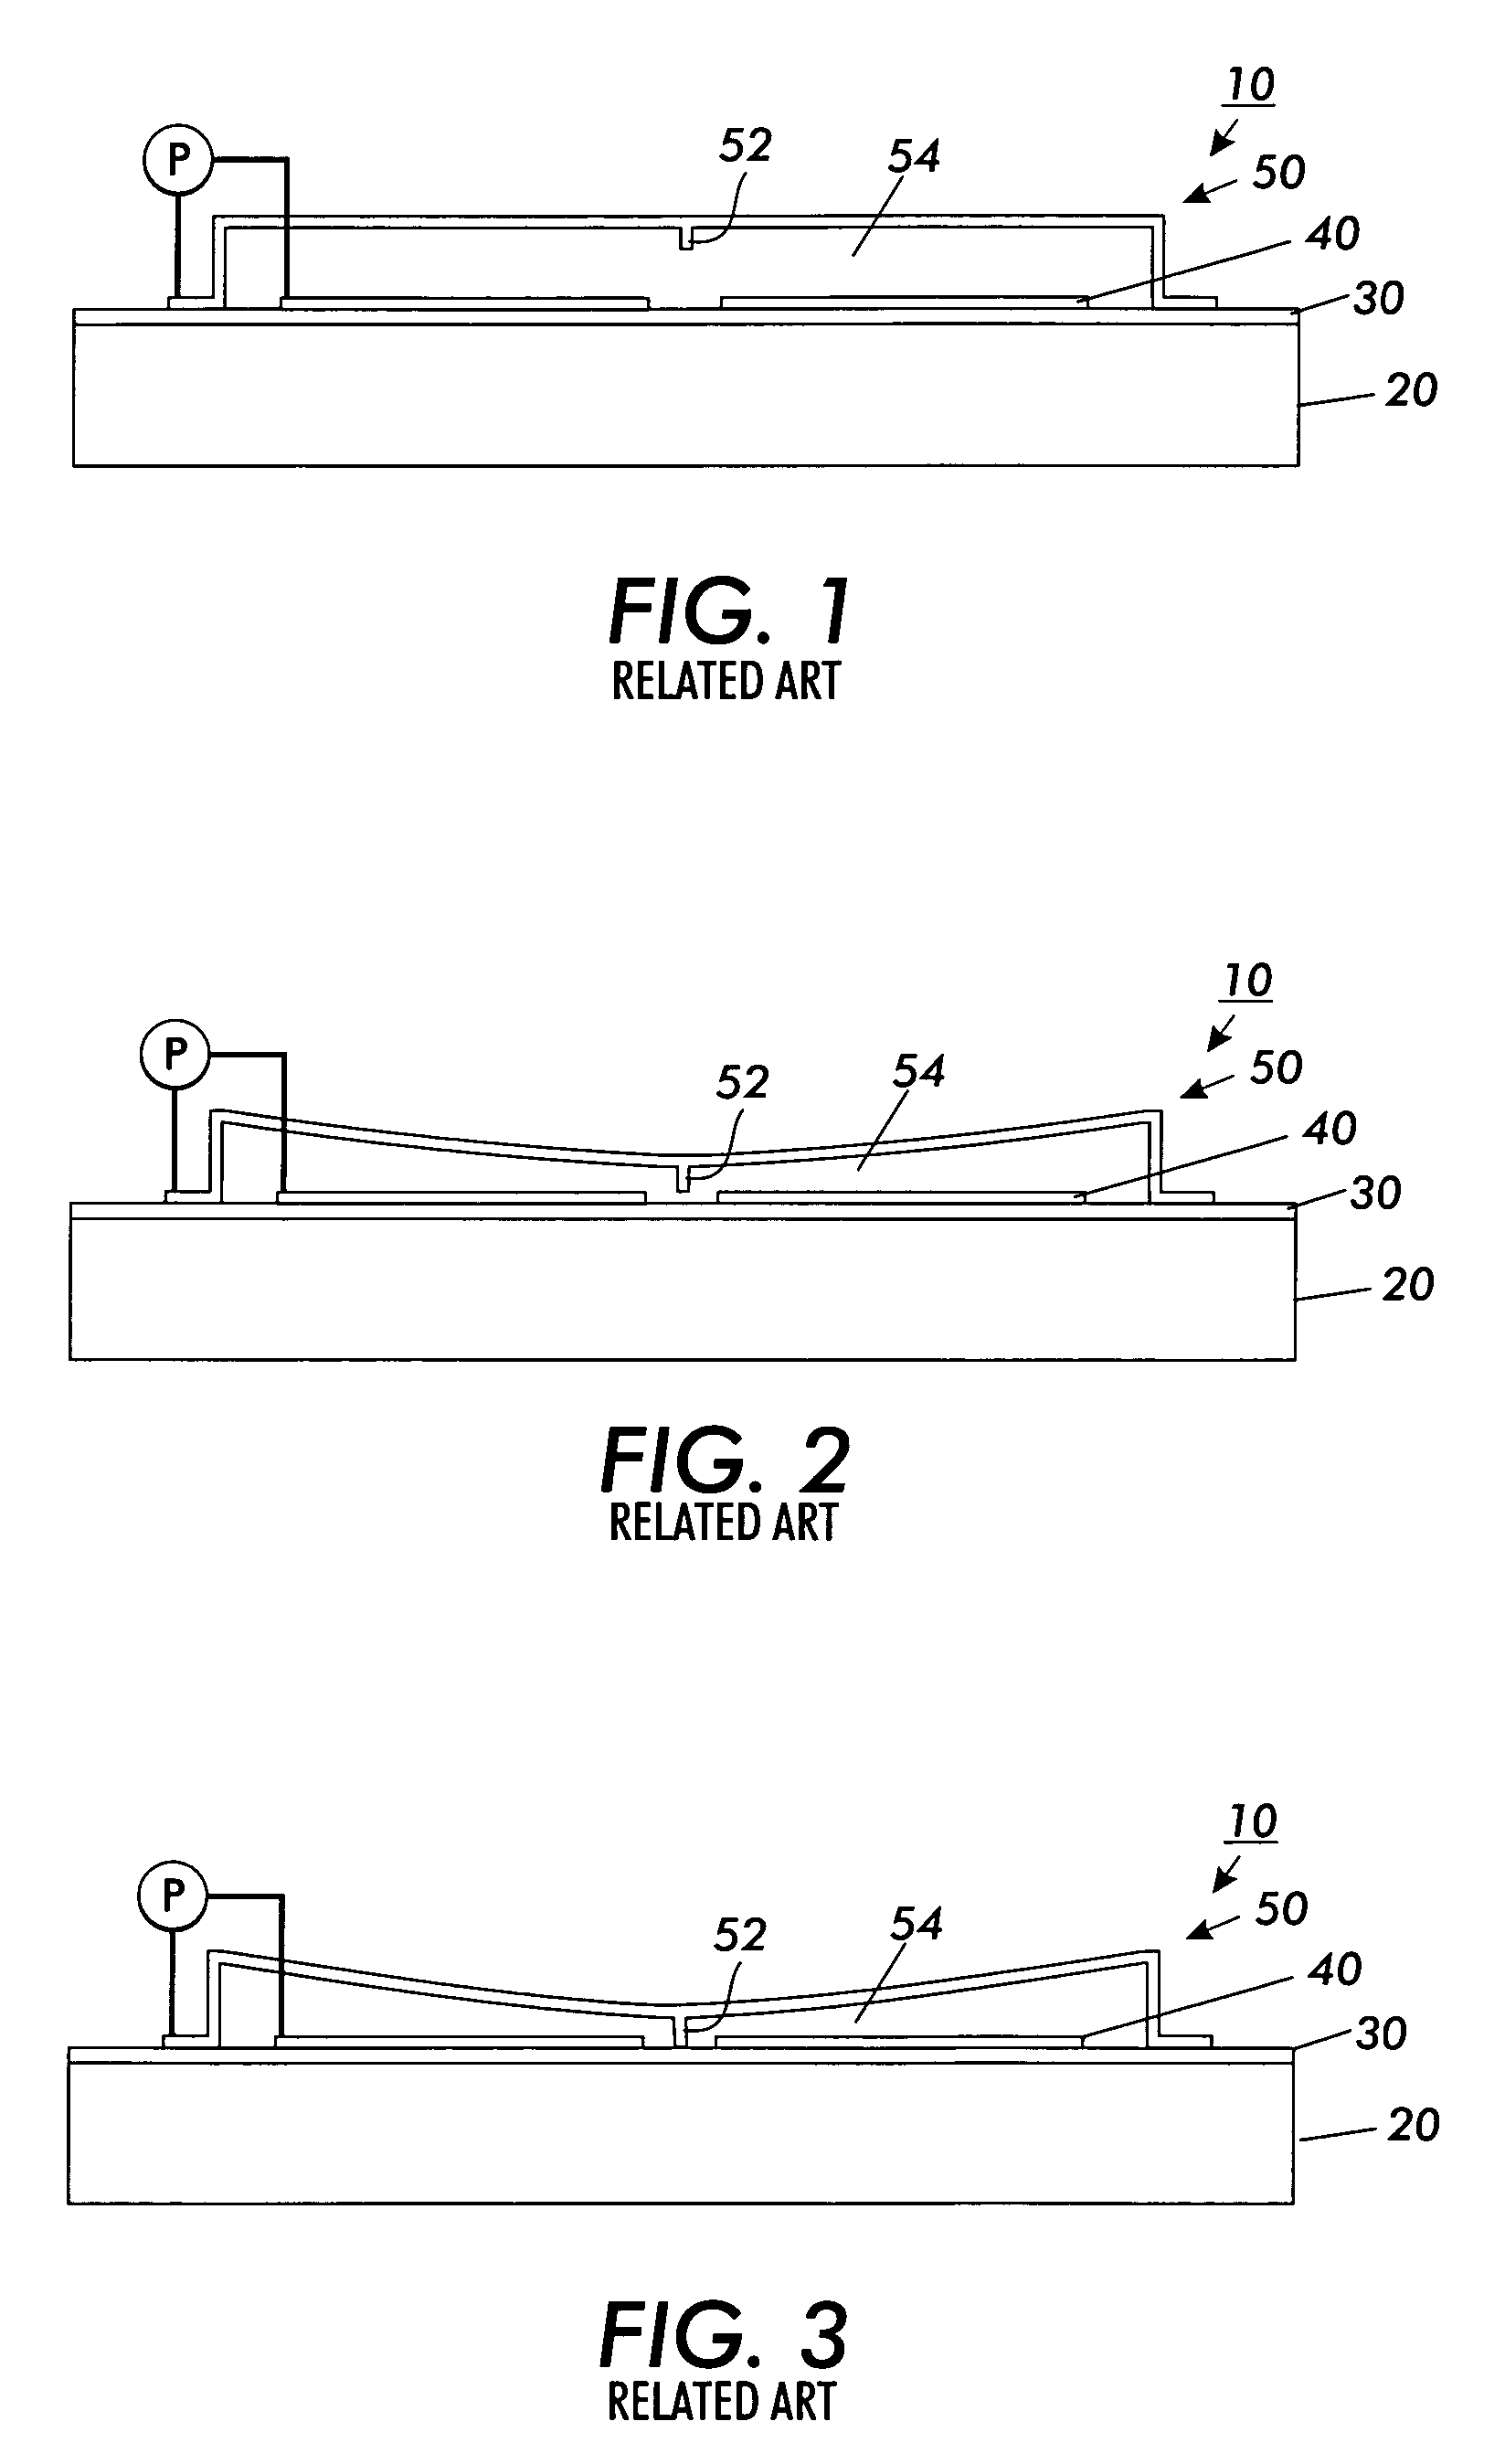 Electrostatic actuator with segmented electrode